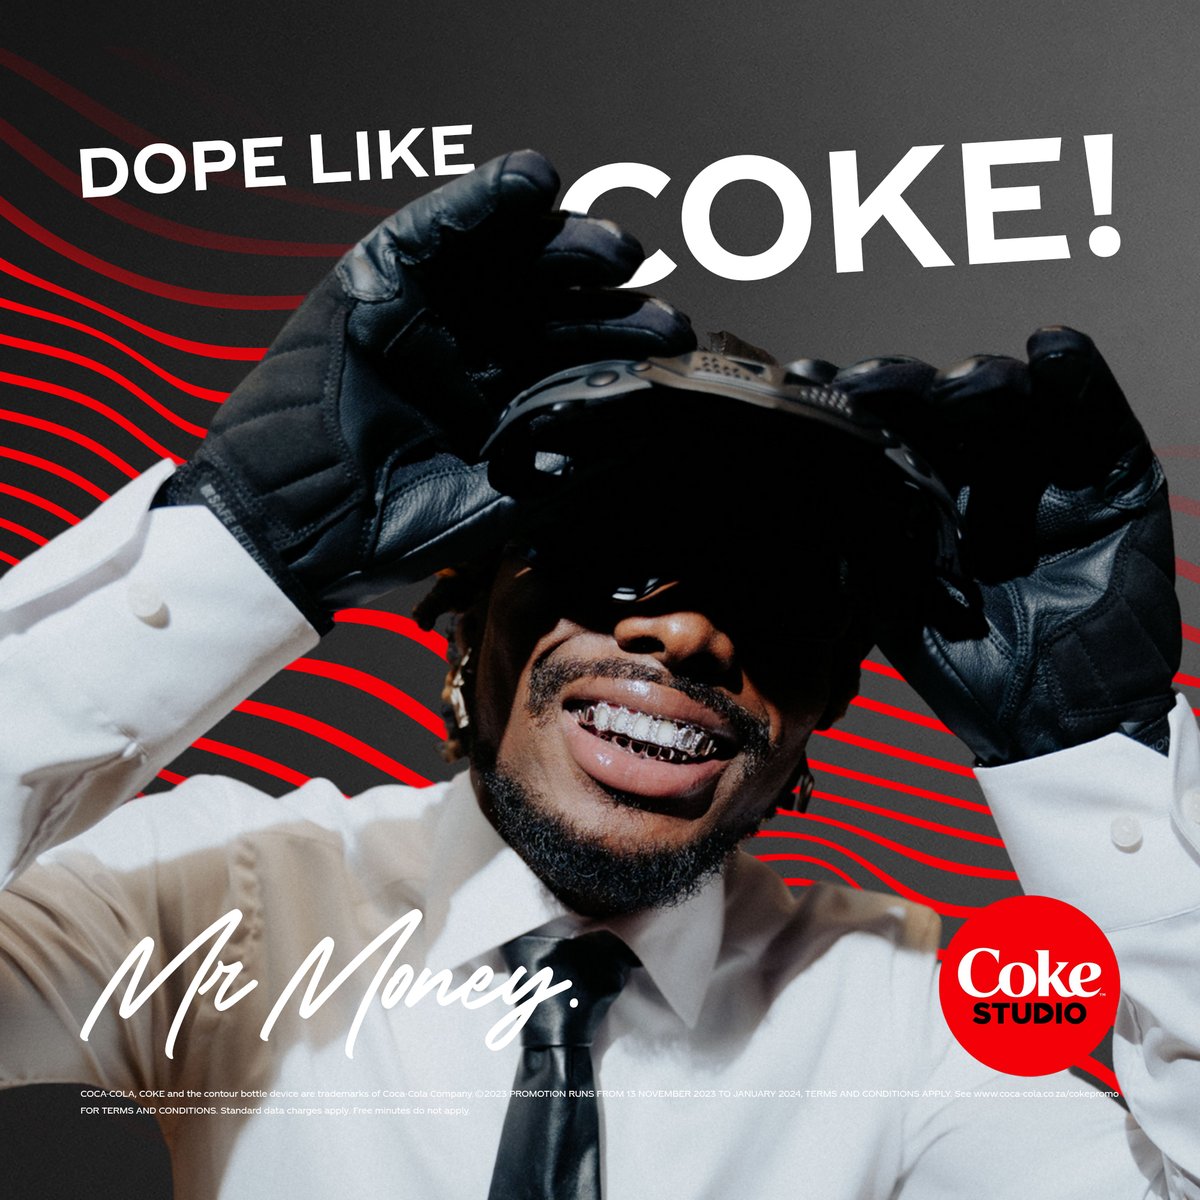 Drippin' in style with the real taste of joy! This is how you should come dripping with your bottle of Coca-Cola! #RealWonder #CokeStudio #CocaColaNG